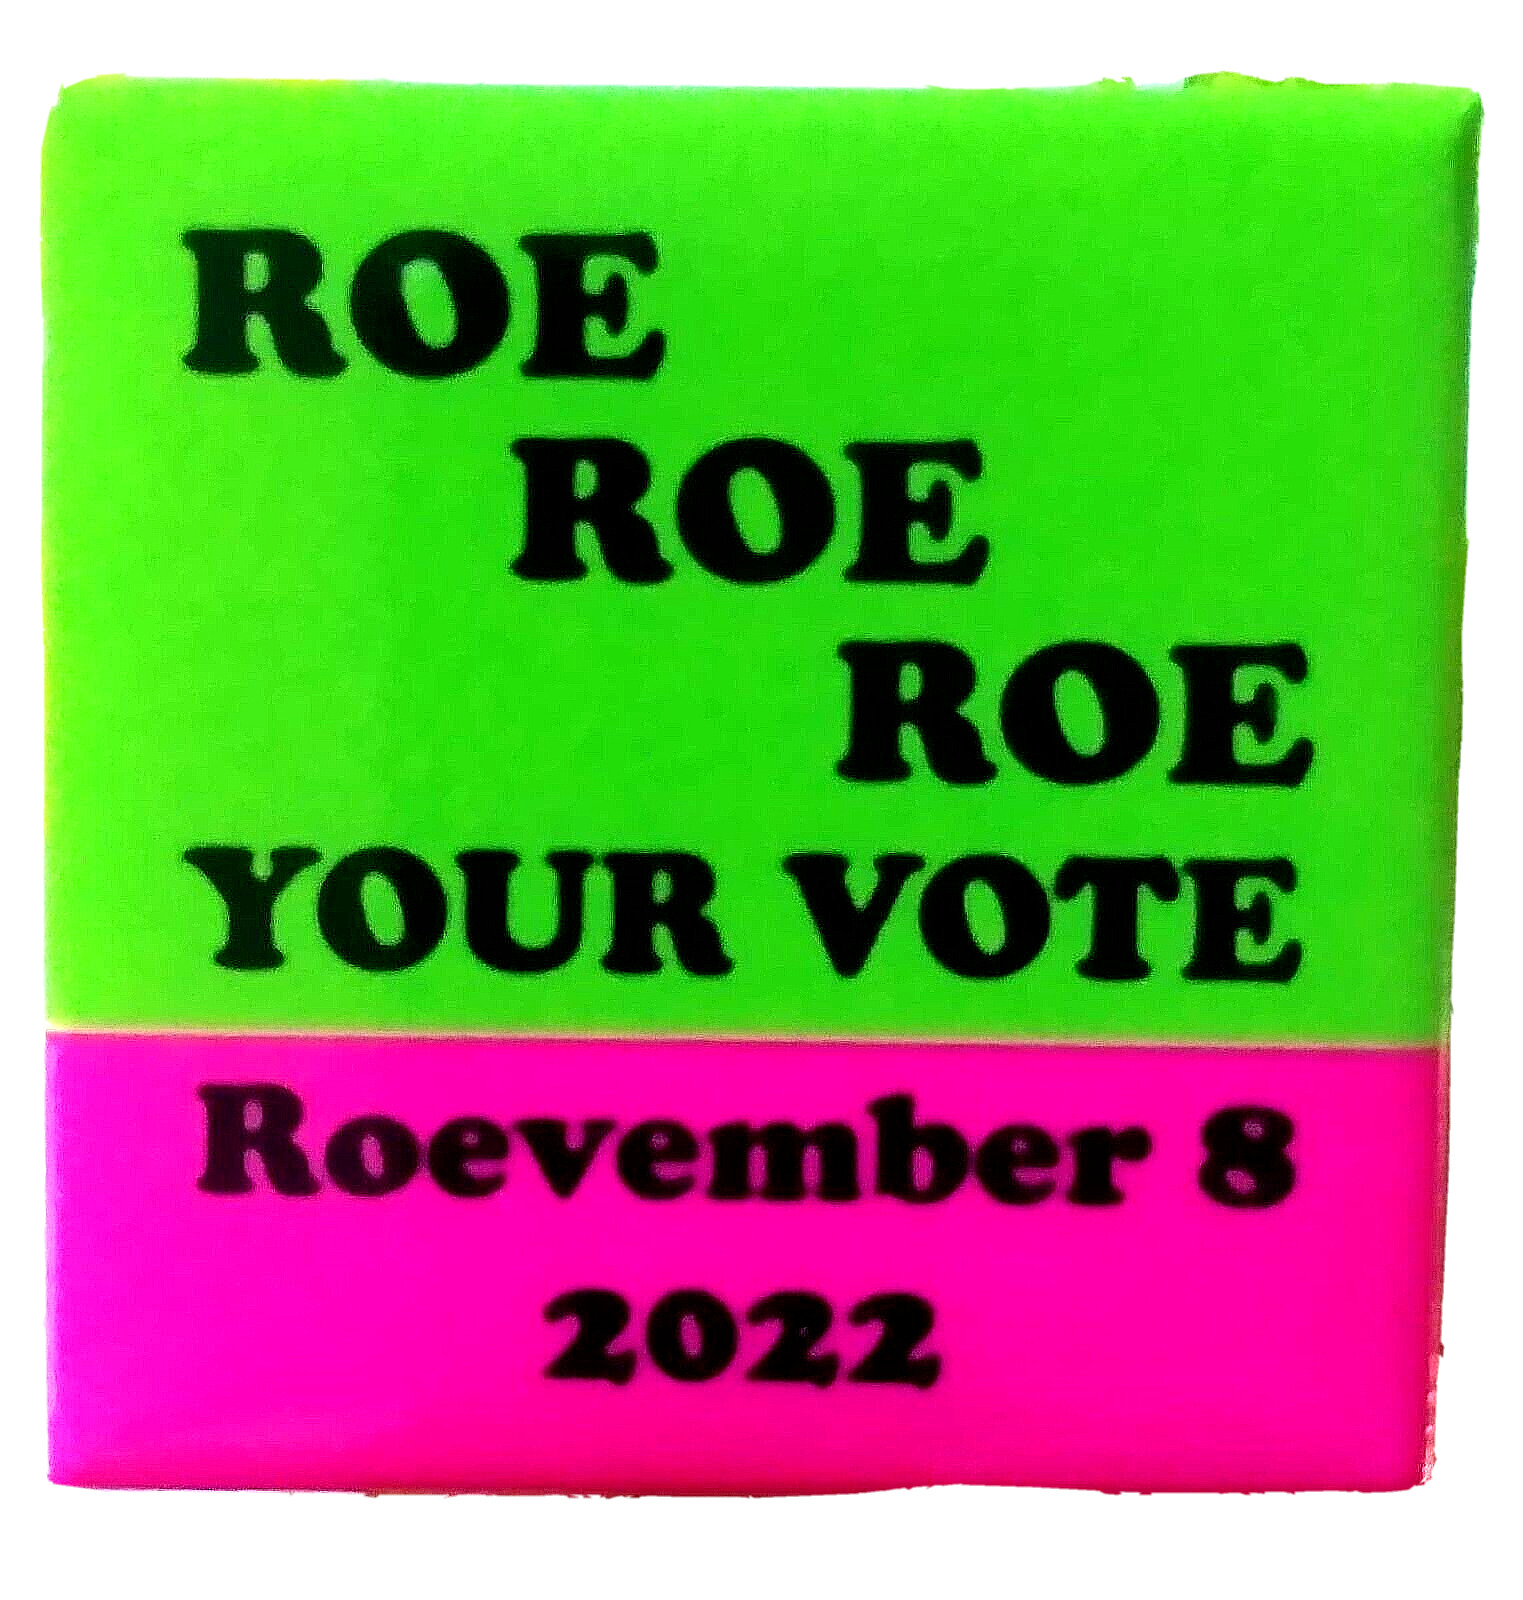 ROE ROE ROE YOUR VOTE - Roevember 8 2022 -  Used to encourage pro-choice voting.